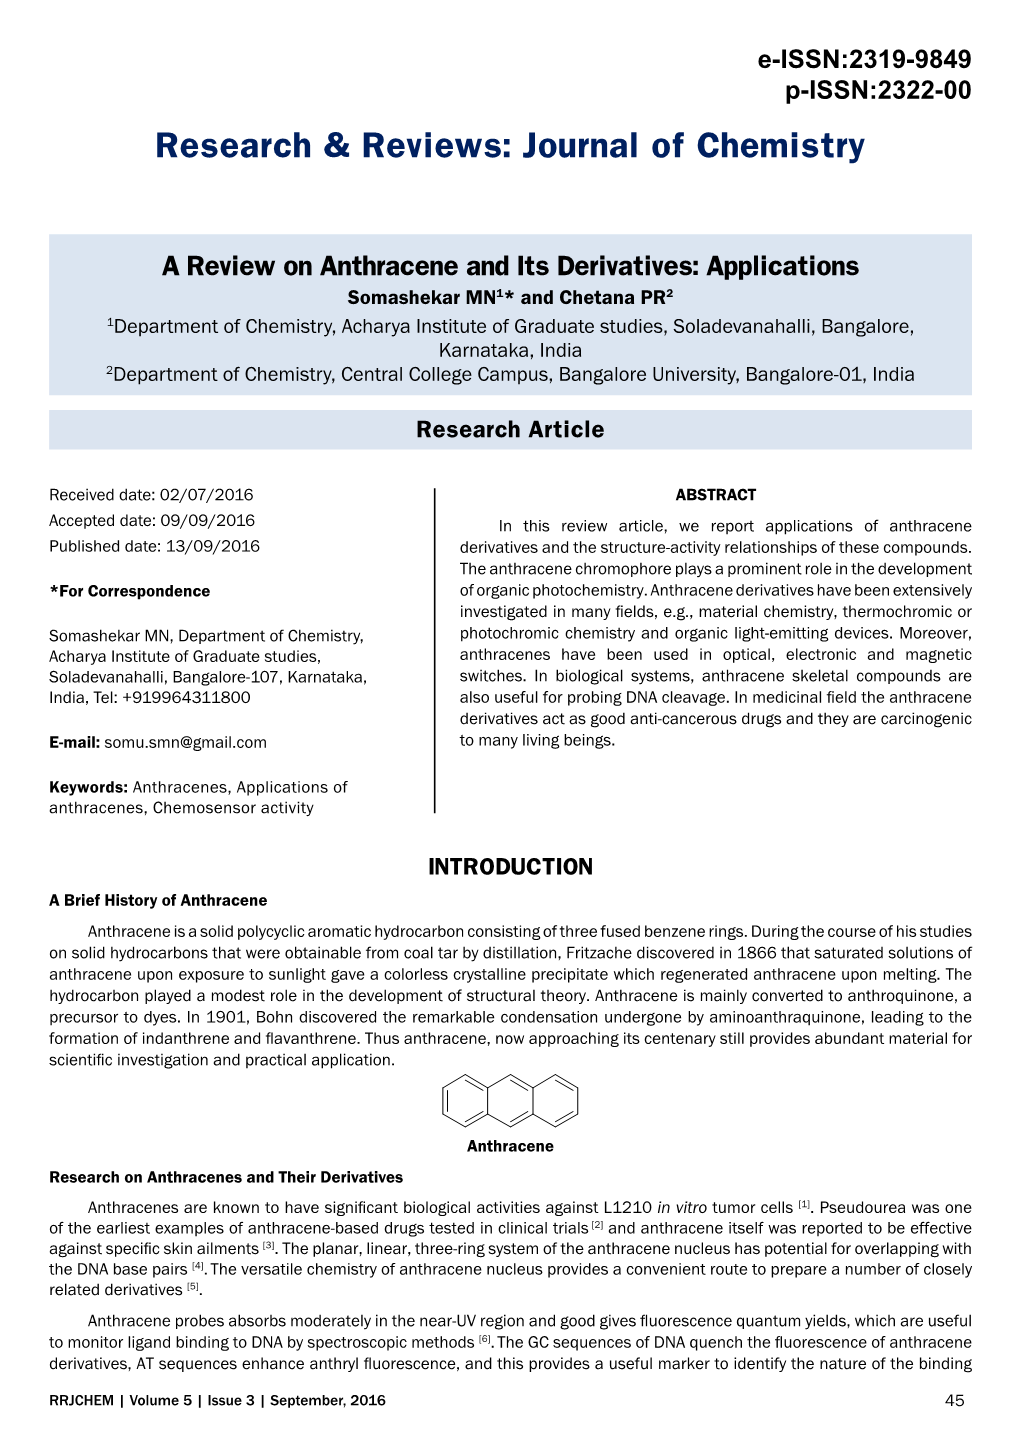 A Review on Anthracene and Its Derivatives: Applications